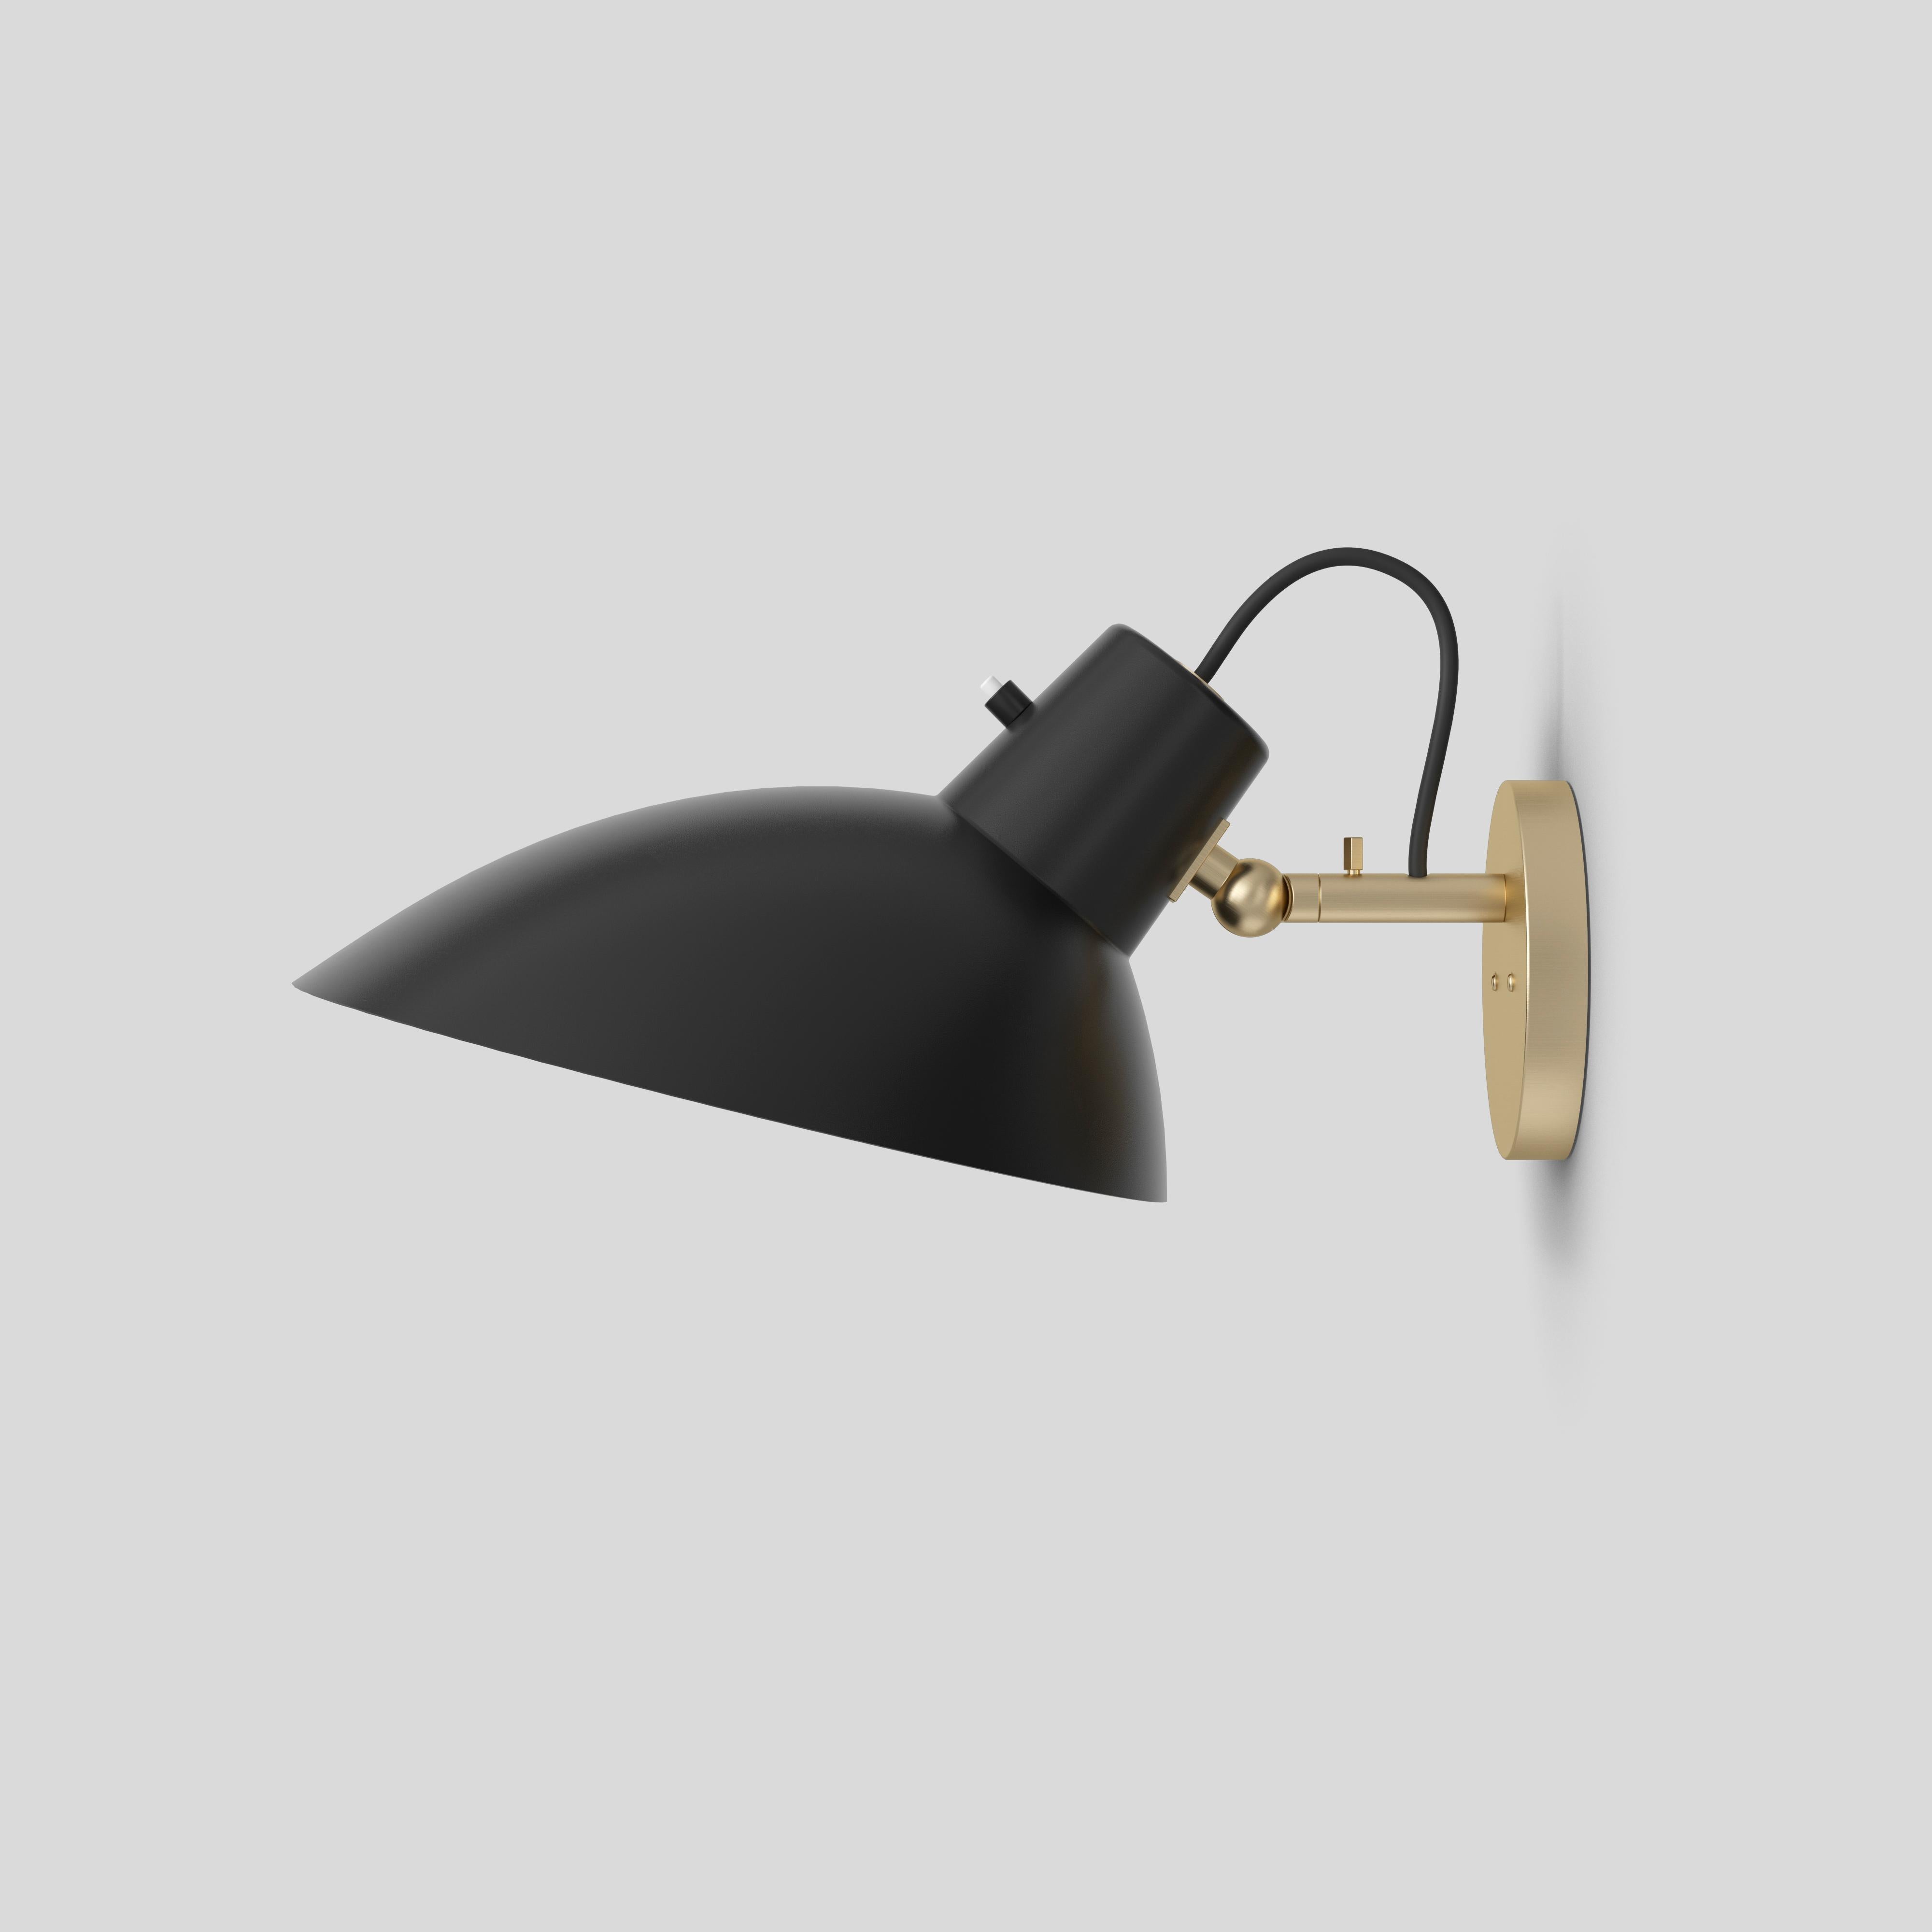 VV Cinquanta wall
Design by Vittoriano Viganò
This version is with black lacquered reflector and brass mount, including switch.

The VV Cinquanta features an elegant and versatile posable direct light source that can swivel and tilt. The Wall